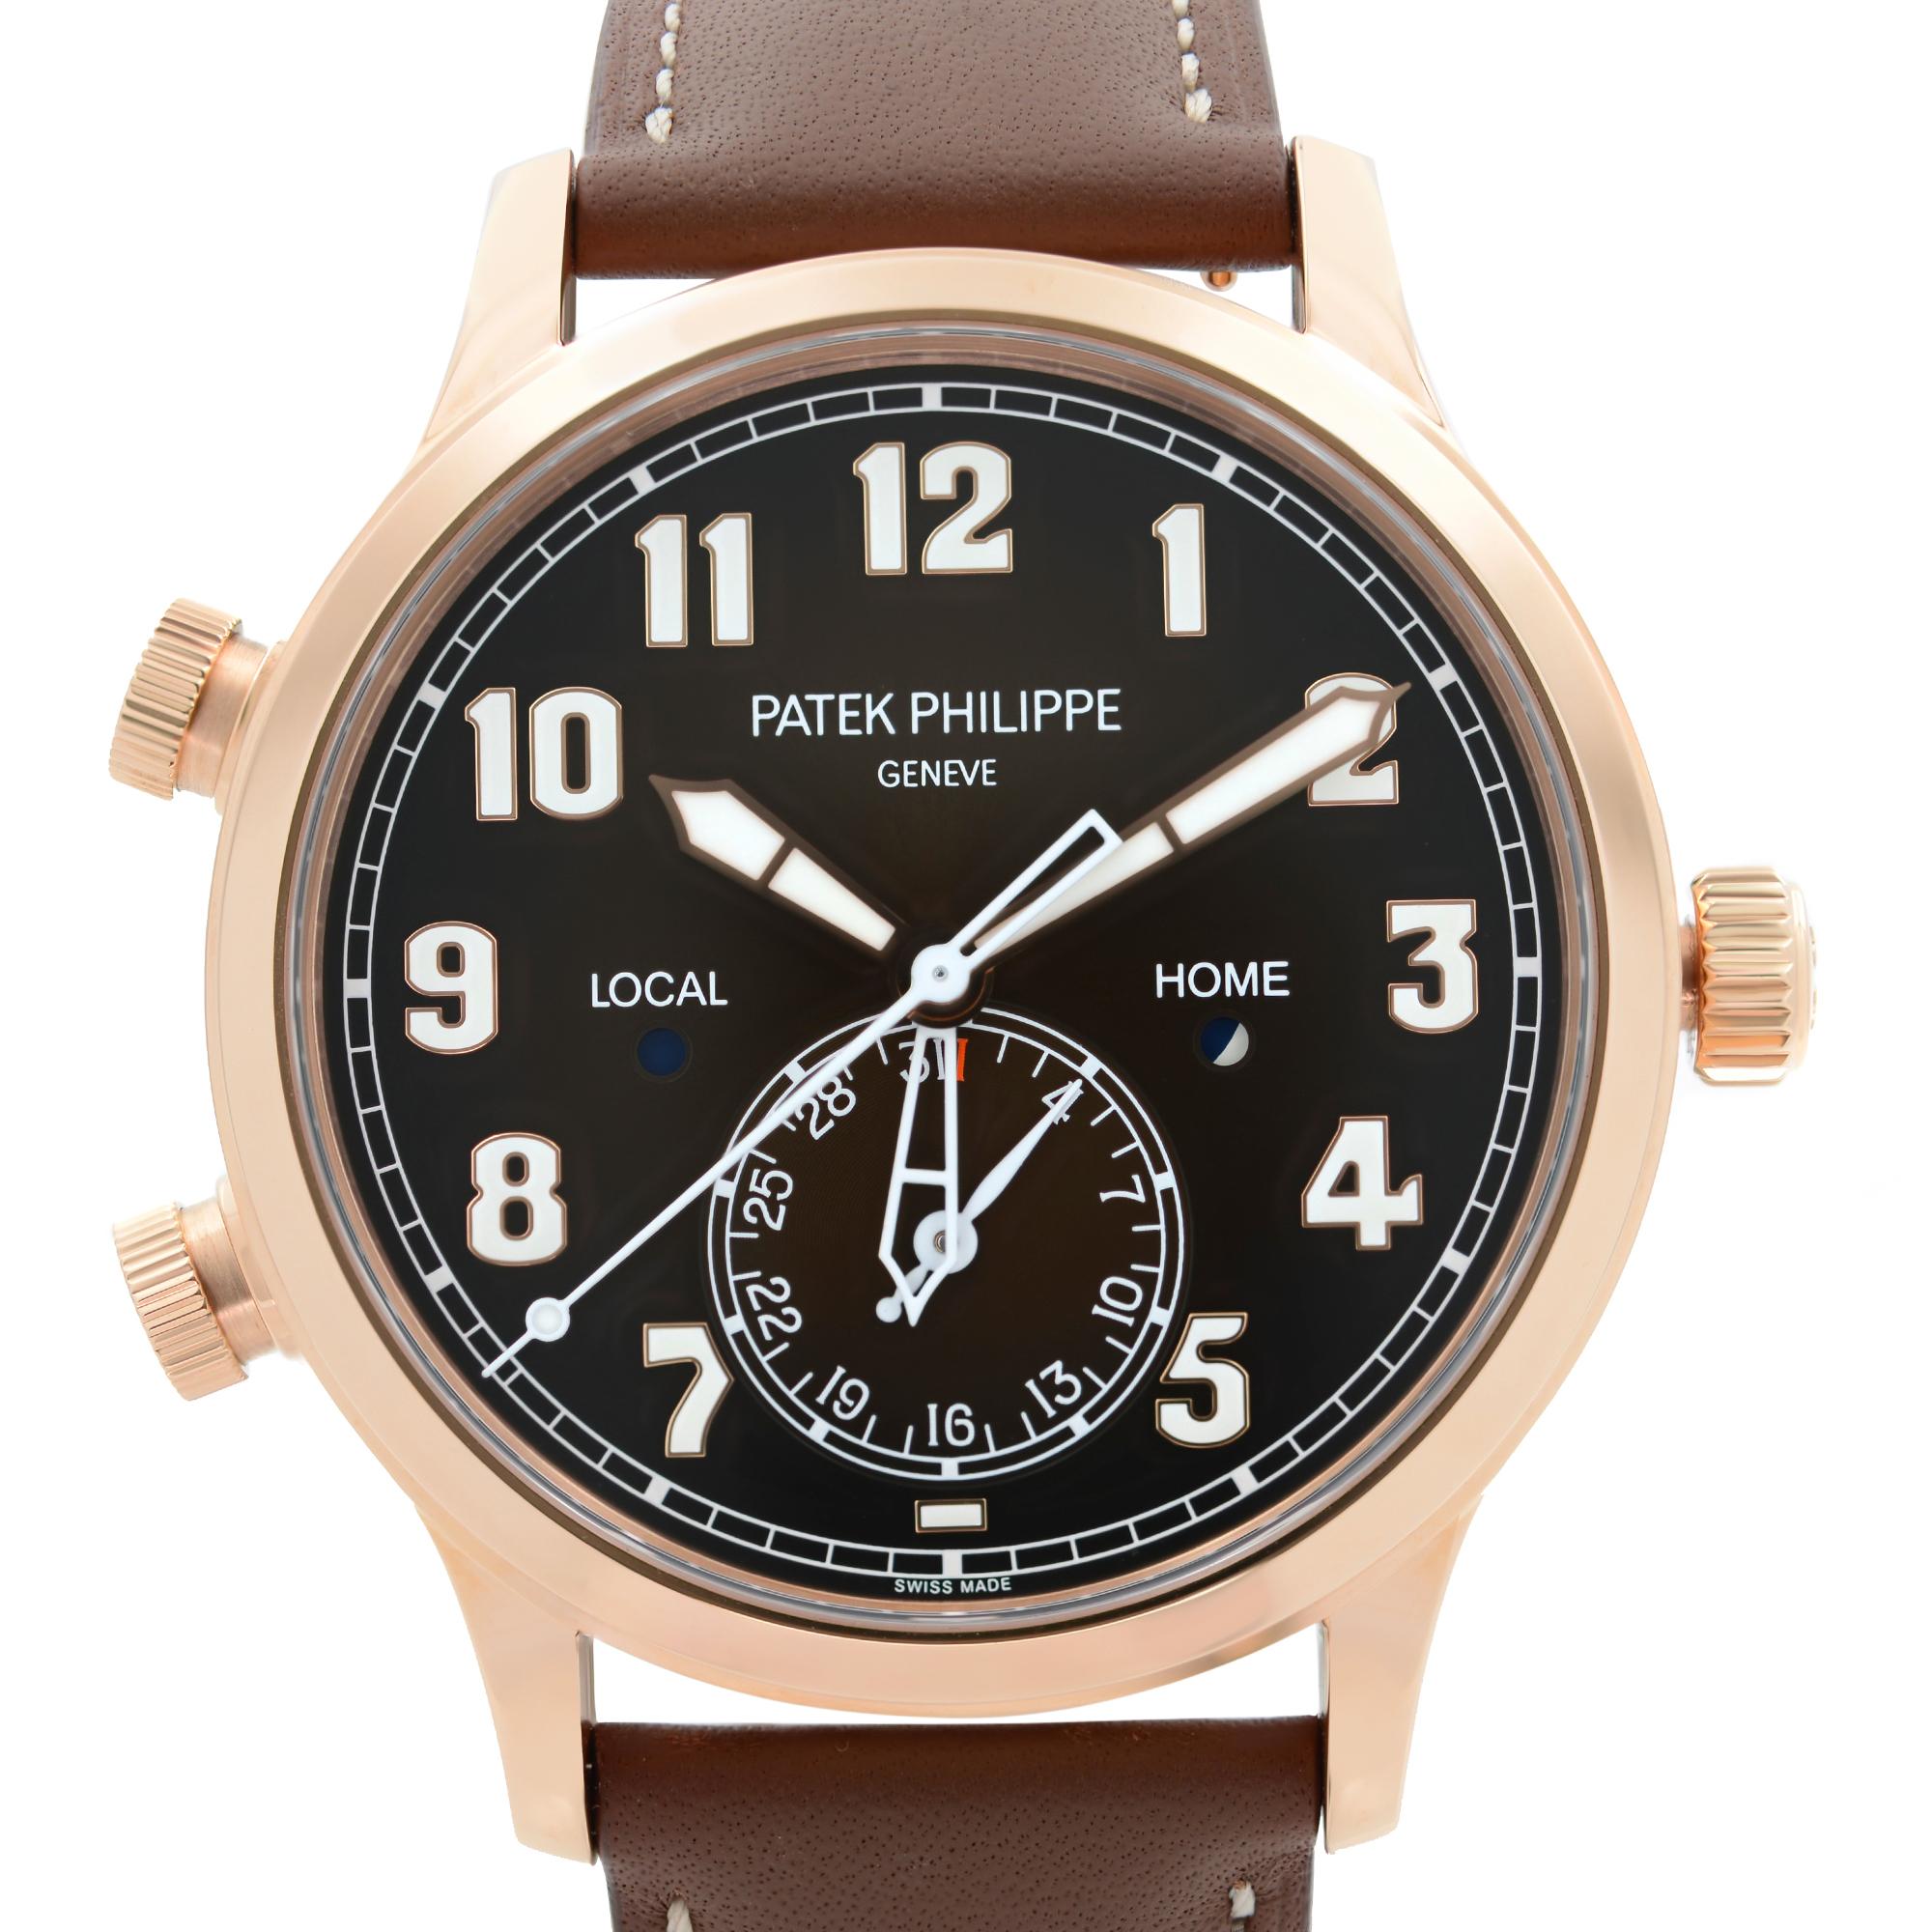 Unworn Patek Philippe Calatrava Pilot Travel Time 18k Rose Gold Mens Watch 5524R-001. Comes with a 2021 Patek Philippe Certificate. This Beautiful Timepiece Features: 18t Rose Gold Case with a Brown (Calfskin) Leather Strap, Fixed 18k Rose Gold